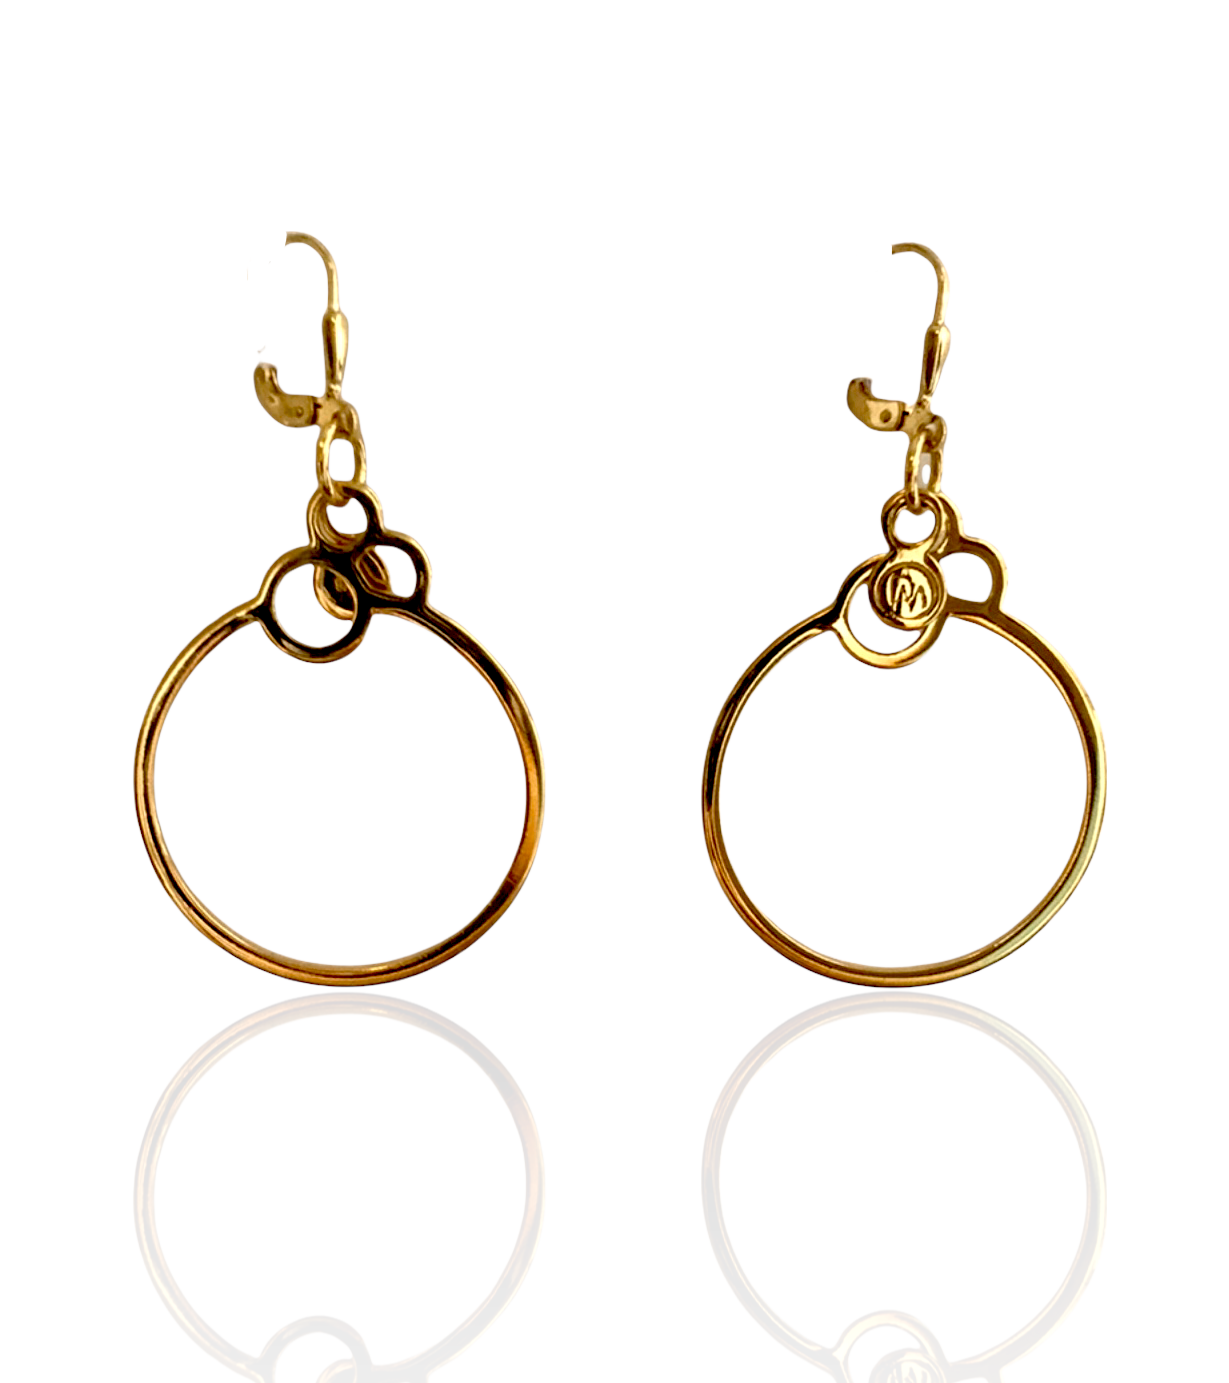 Extra light, gentle hoop earrings with a logo from Circles collection.   Material: 18 karat gold-plated silver.   Size: hoop diameter - 3cm.